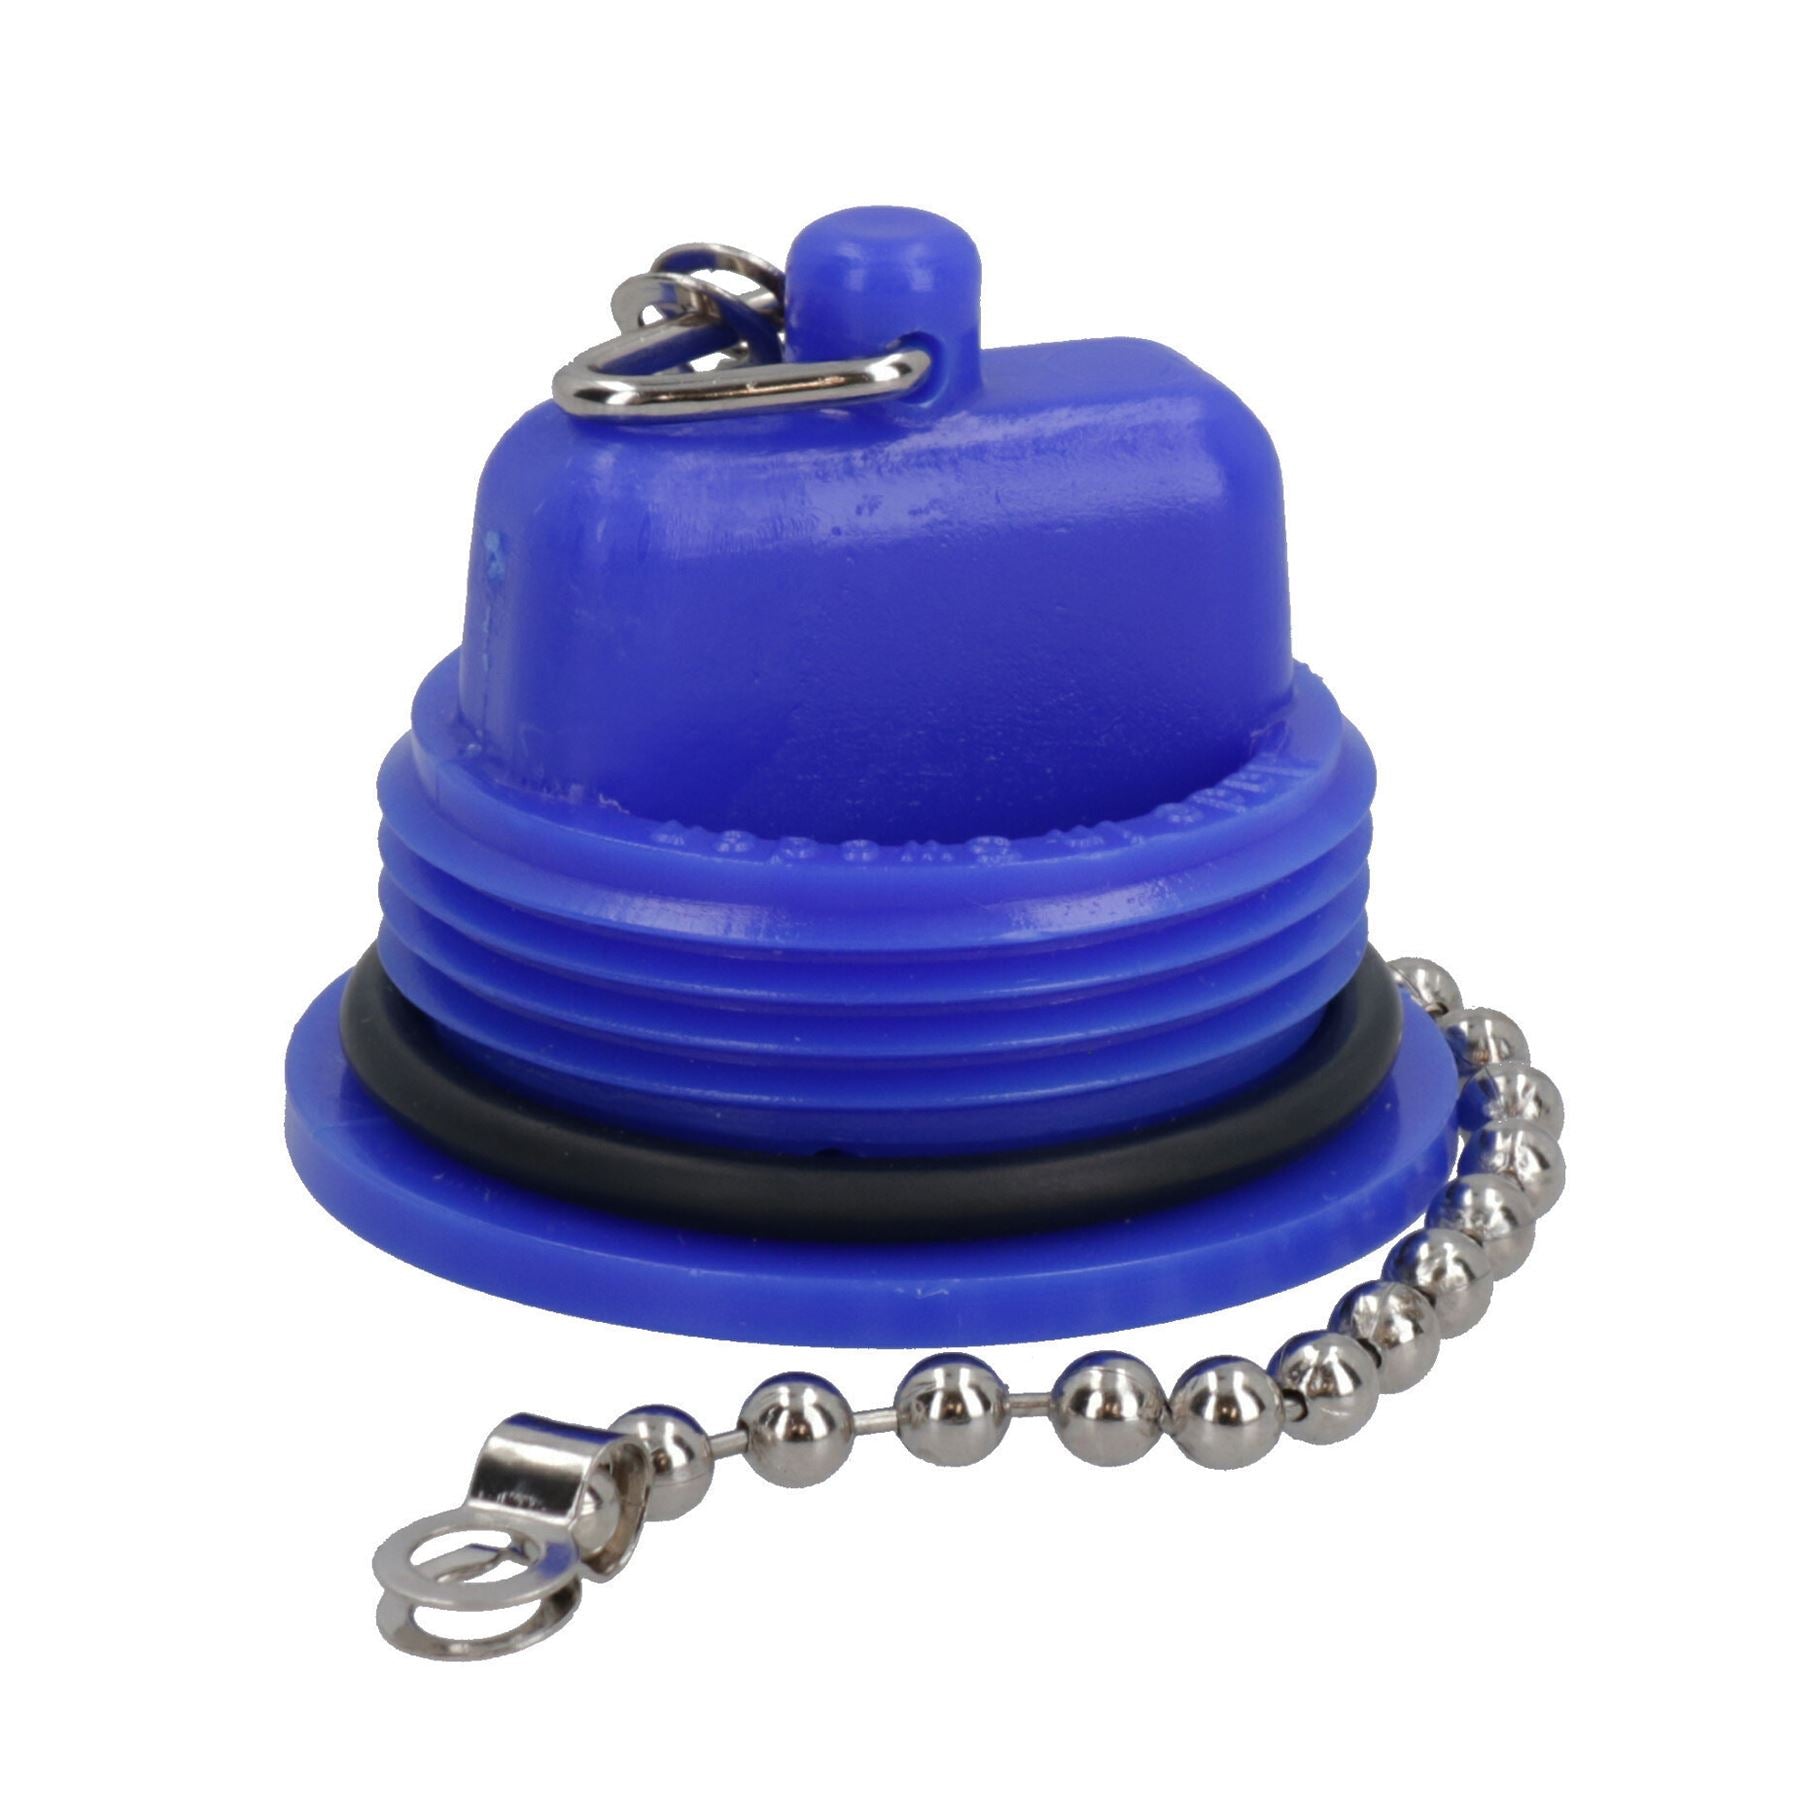 38mm Spare Deck Filler Cap with Chain for Boat Deck Plate Waste Water Fuel